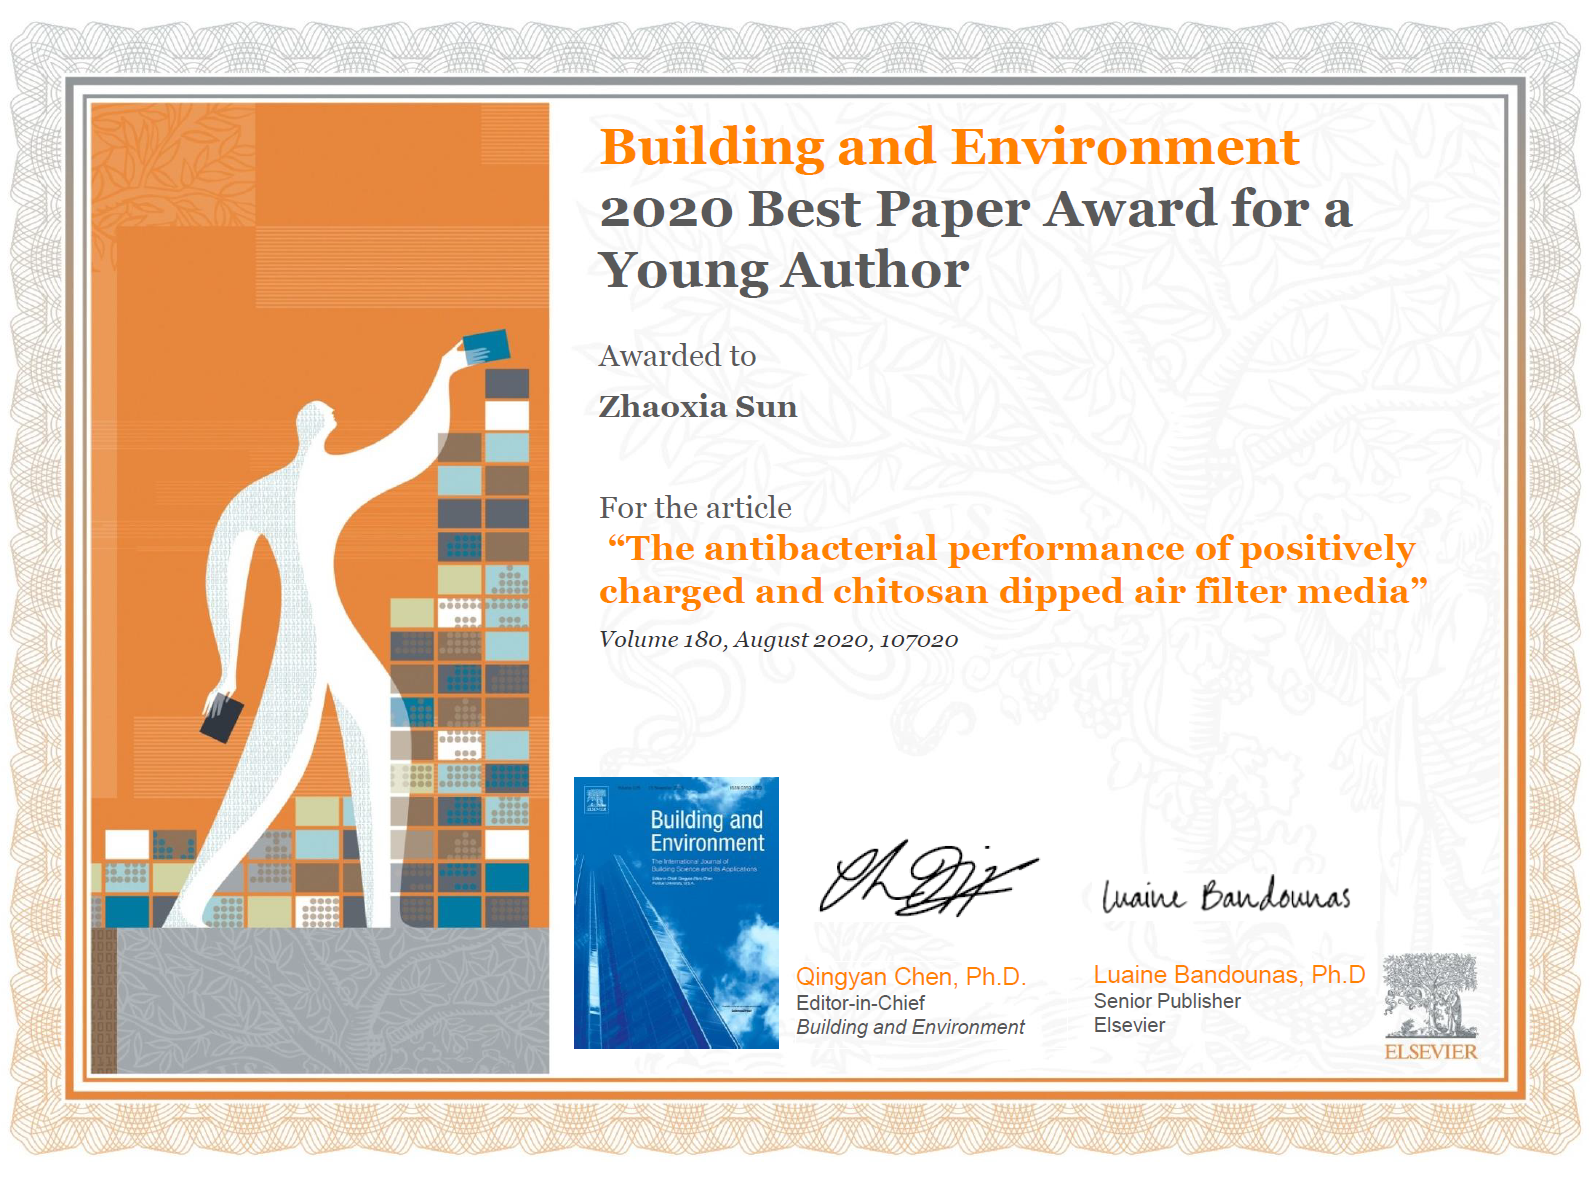 Best Paper Award of a Young Author for Zhaoxia Sun, Building and Environment